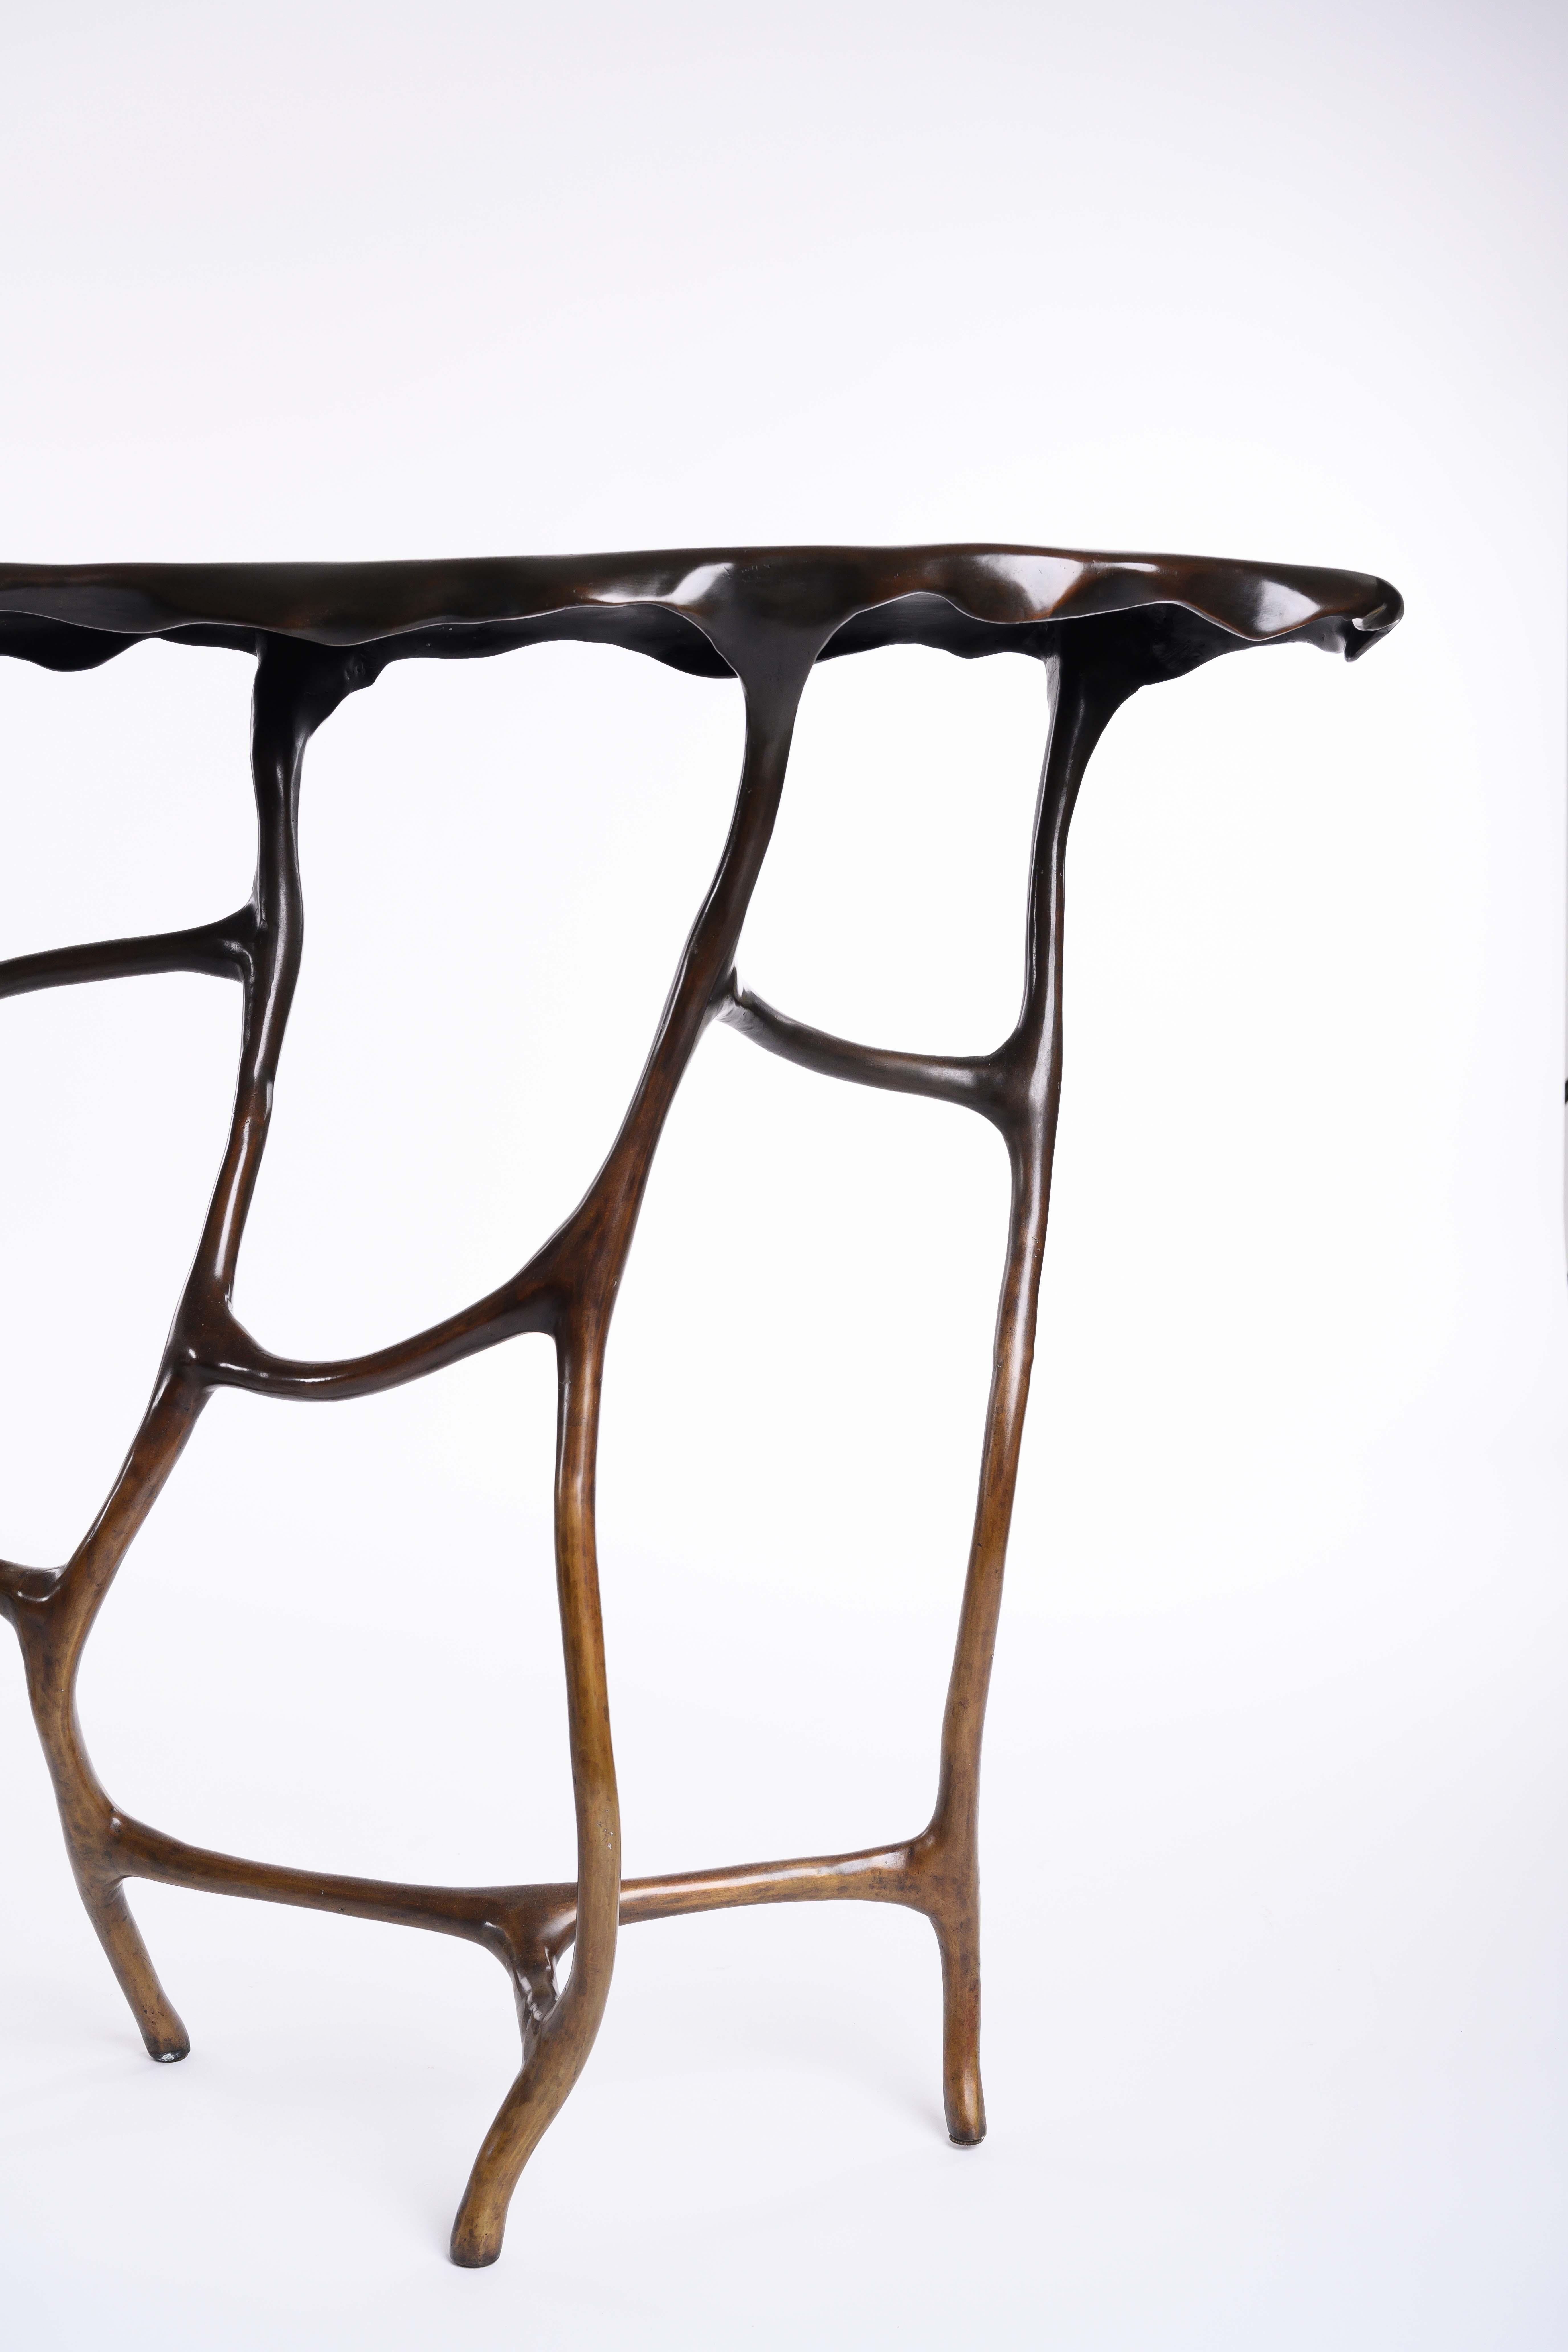 Bronze Dali Console Table in Ombre Finish by Elan Atelier (Preorder) For Sale 1